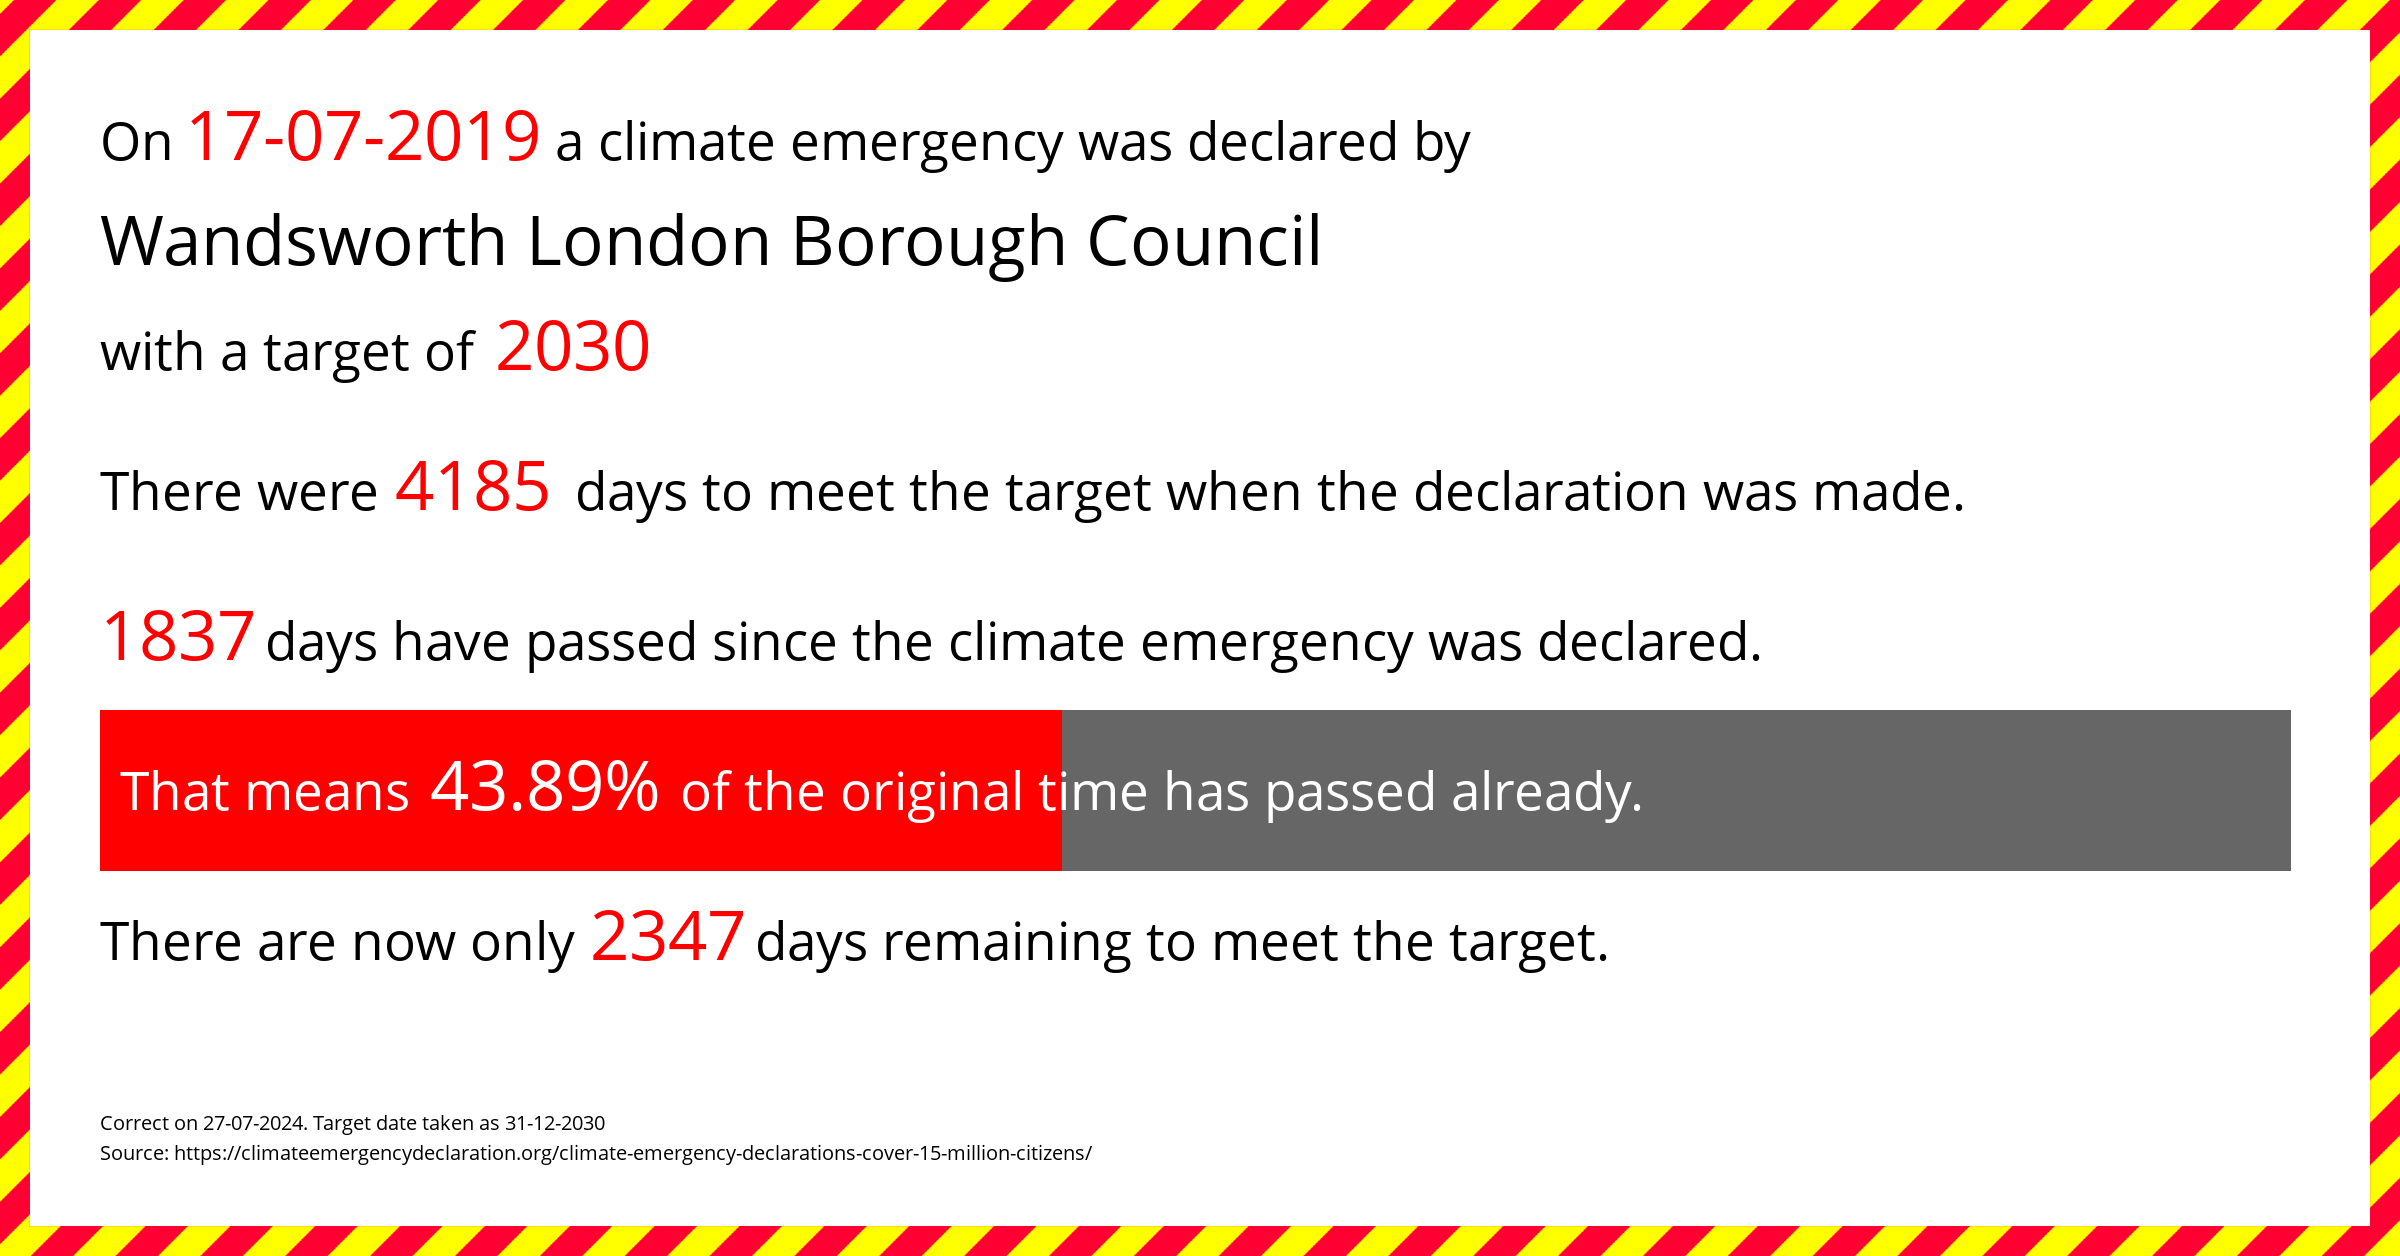 Wandsworth London Borough Council declared a Climate emergency on Wednesday 17th July 2019, with a target of 2030.